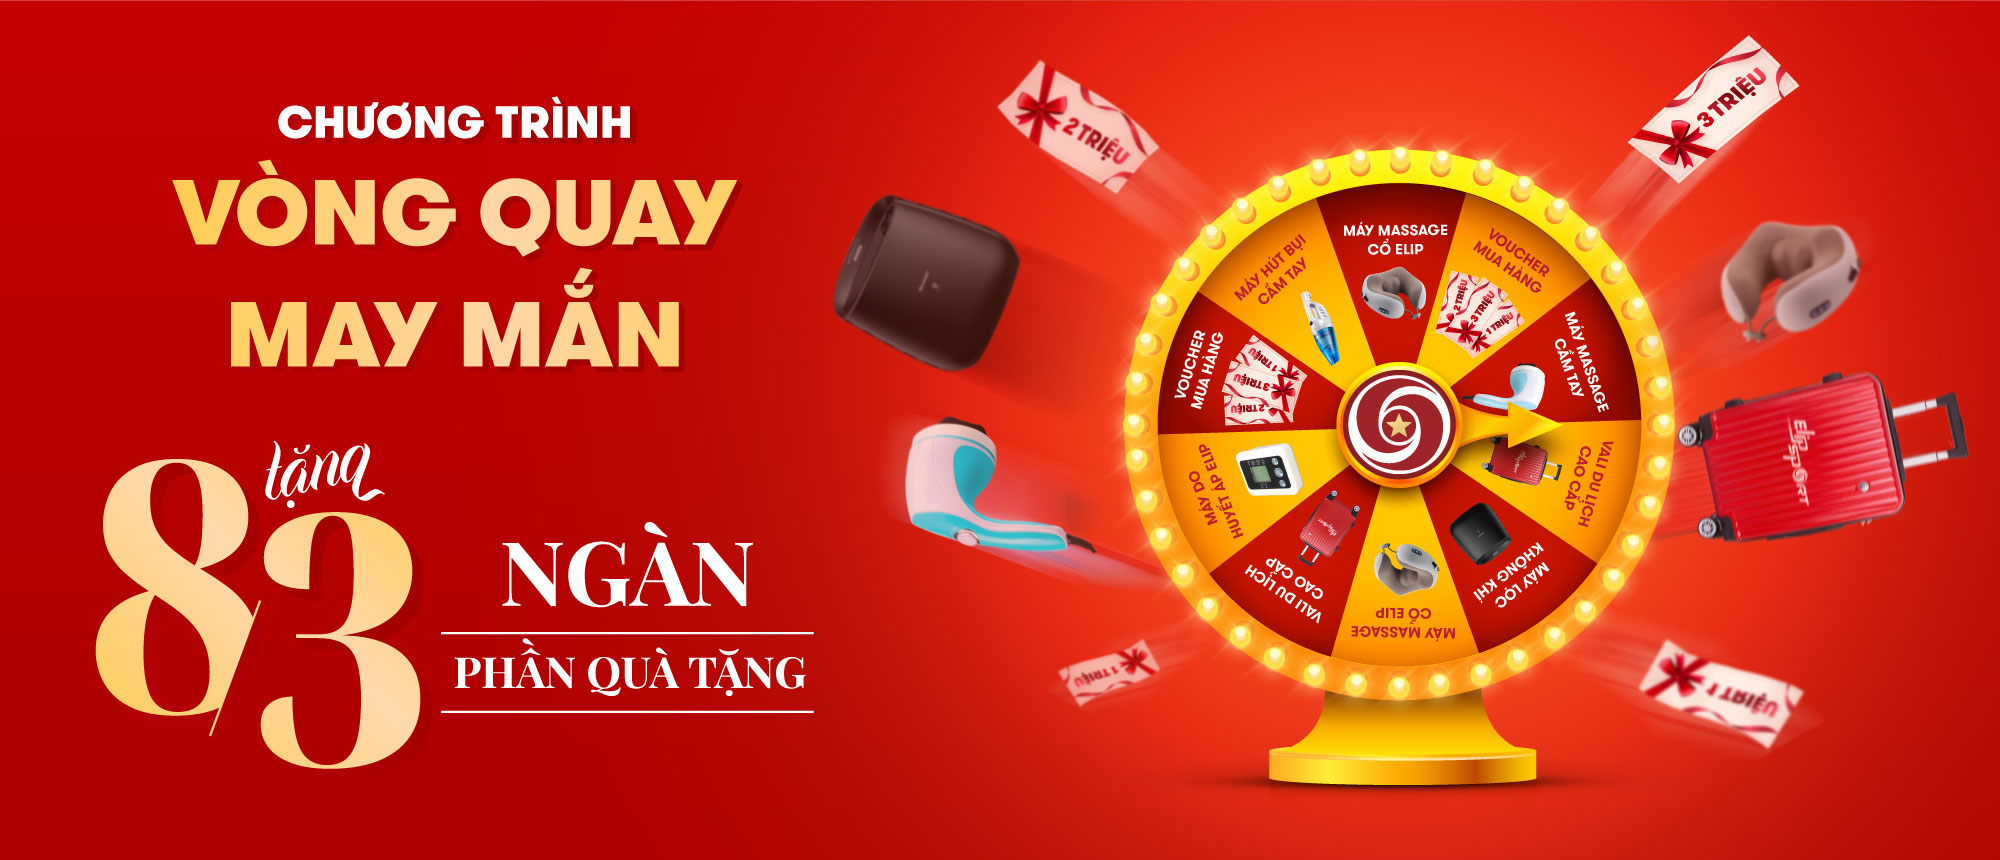 vong-quay-may-man-elipsport